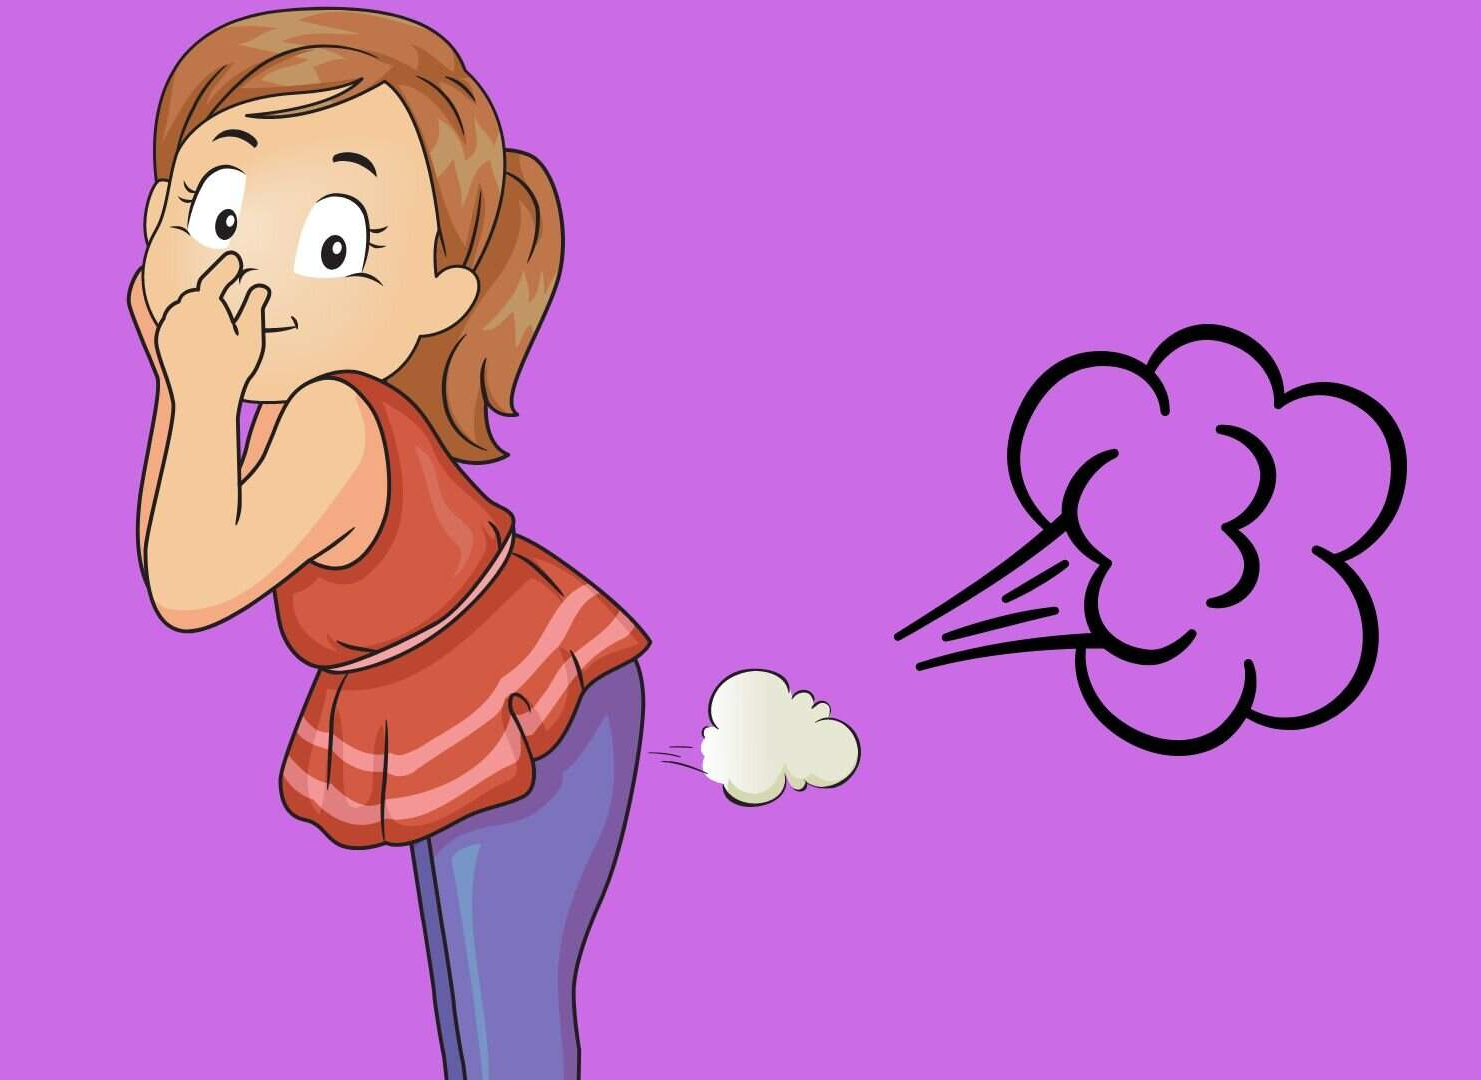 Why do farts stink?